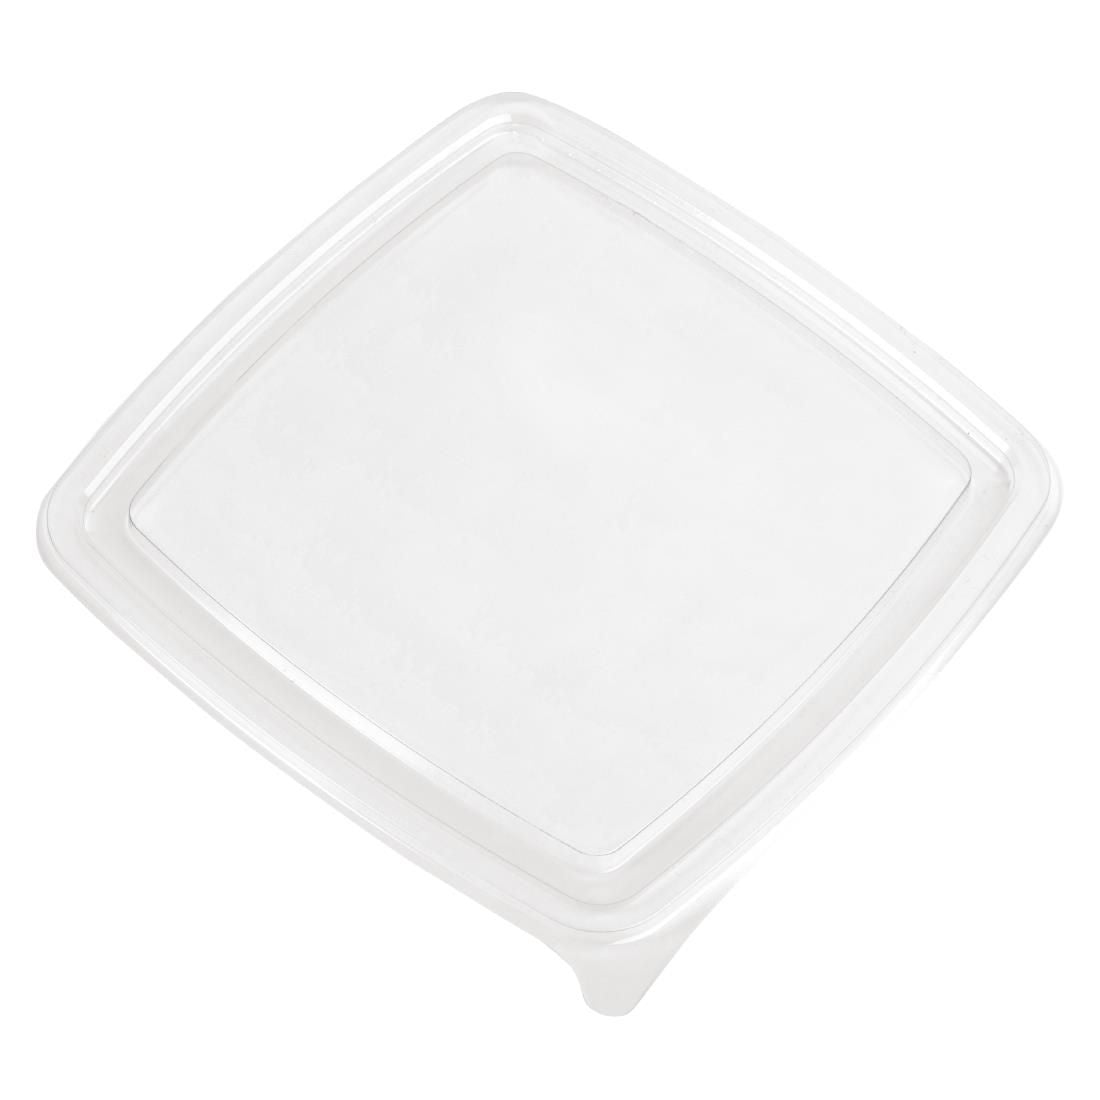 Faerch Twisty Recyclable Deli Bowl Lids 1000ml / 35oz (Pack of 720) JD Catering Equipment Solutions Ltd